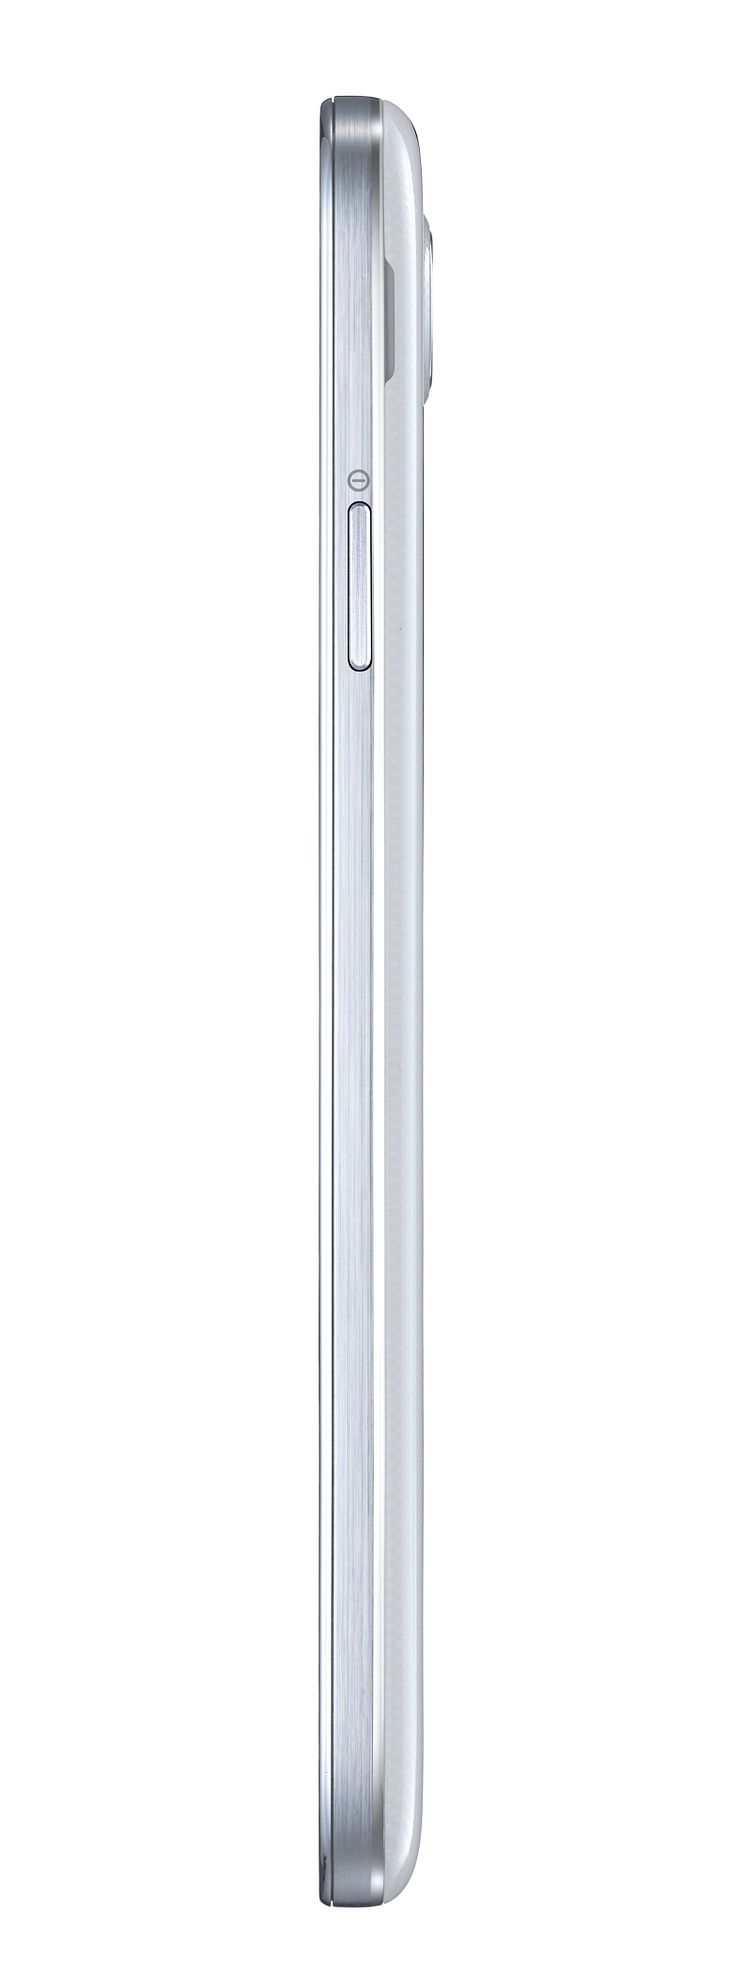 Galaxy S4 Product image (4)